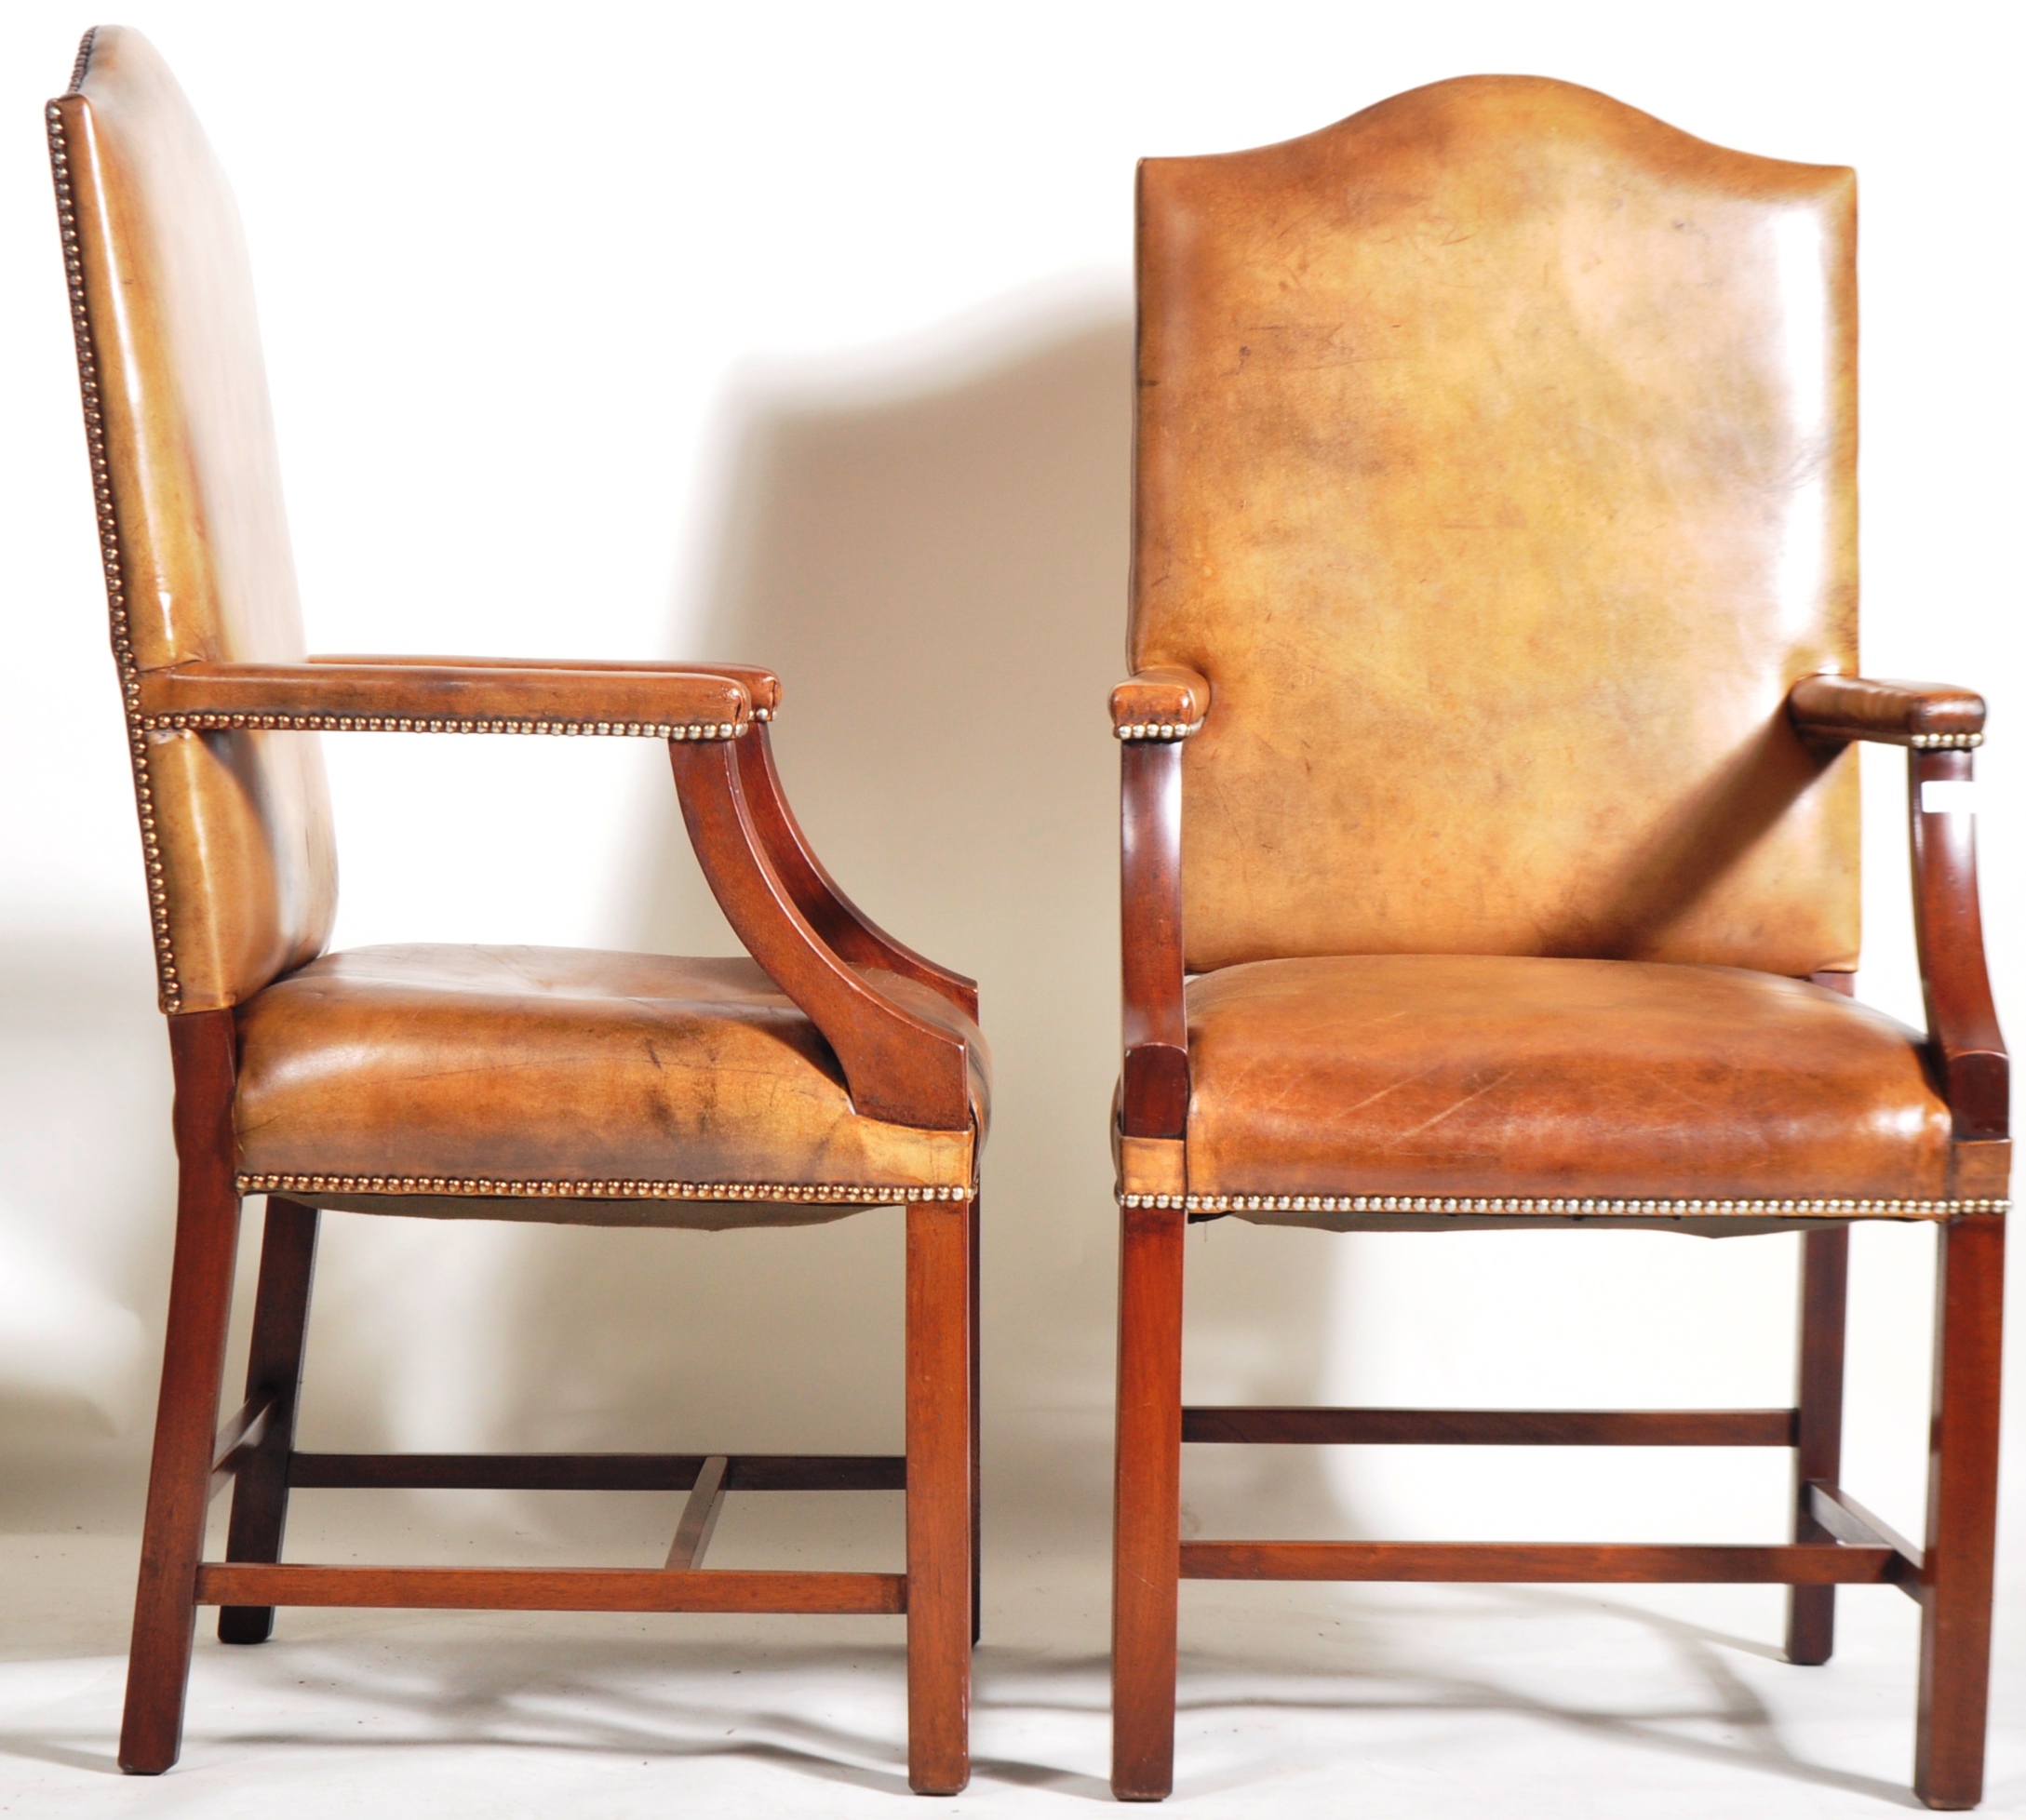 PAIR OF GEORGE II MANNER FAUX LEATHER GAINSBOROUGH ARMCHAIRS - Image 5 of 7